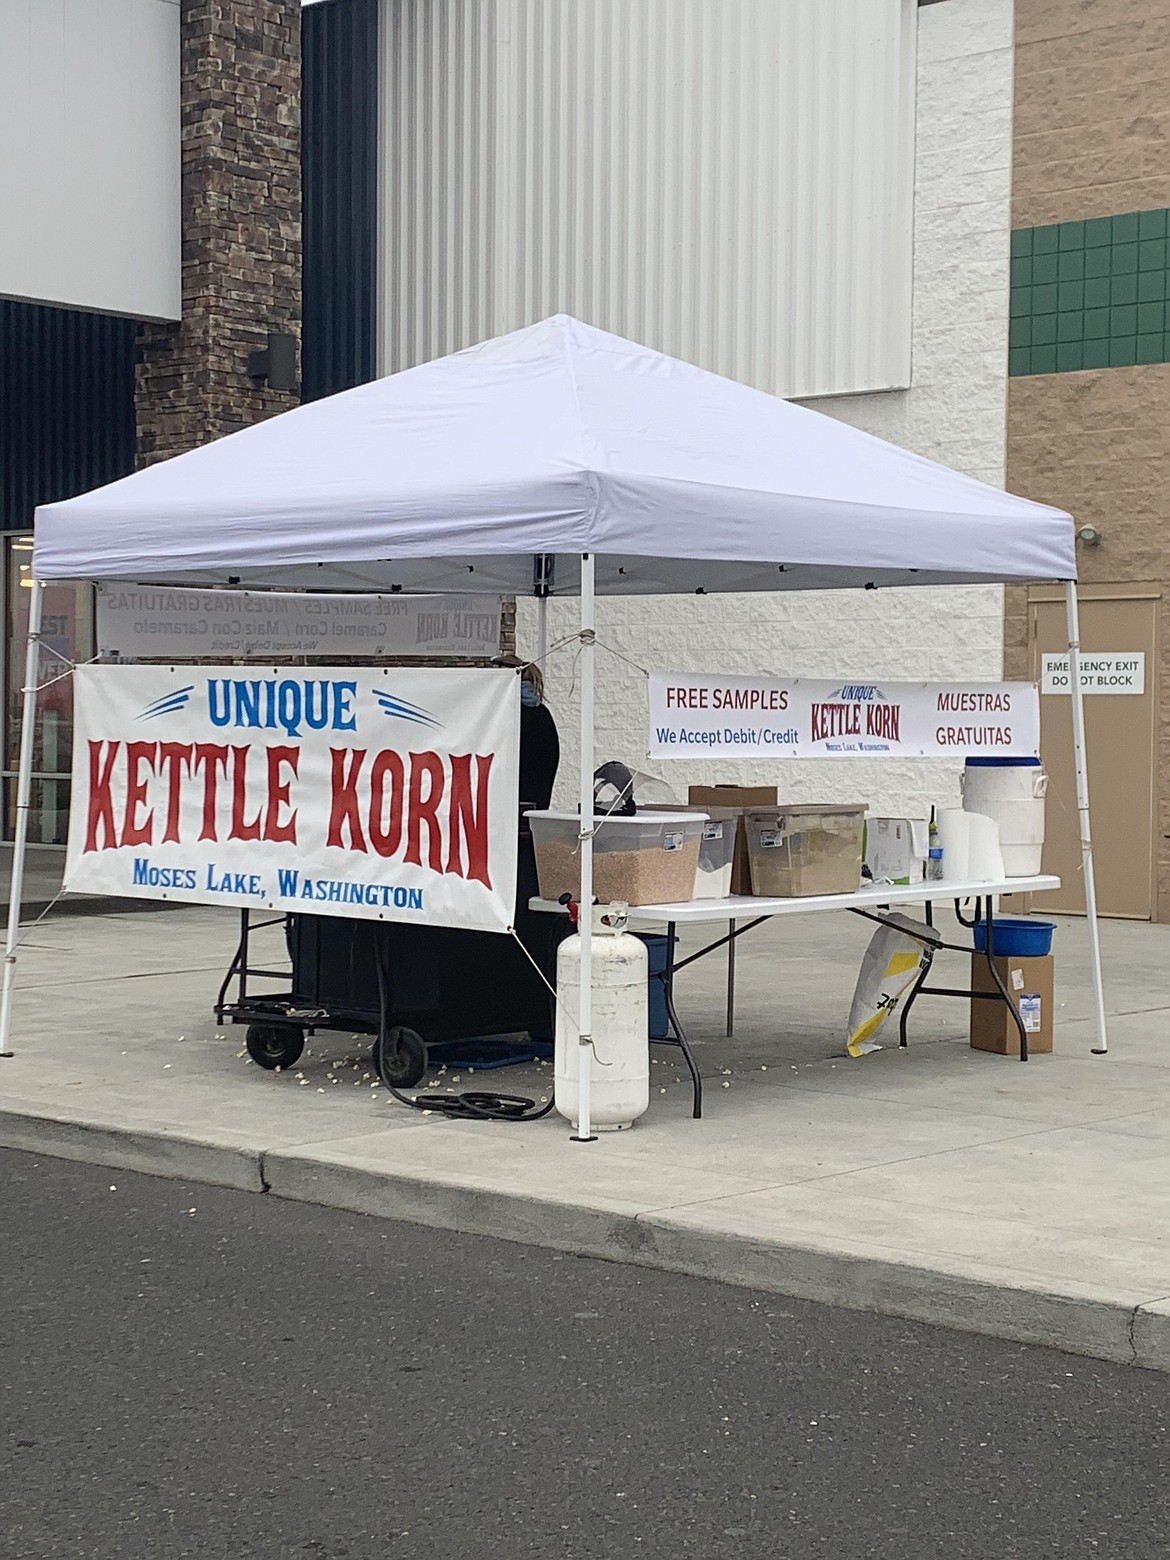 Pop-up booths, like the one pictured, and events like the Othello Fair, are the biggest money-makers for Unique Kettle Korn, Jim Huff said.